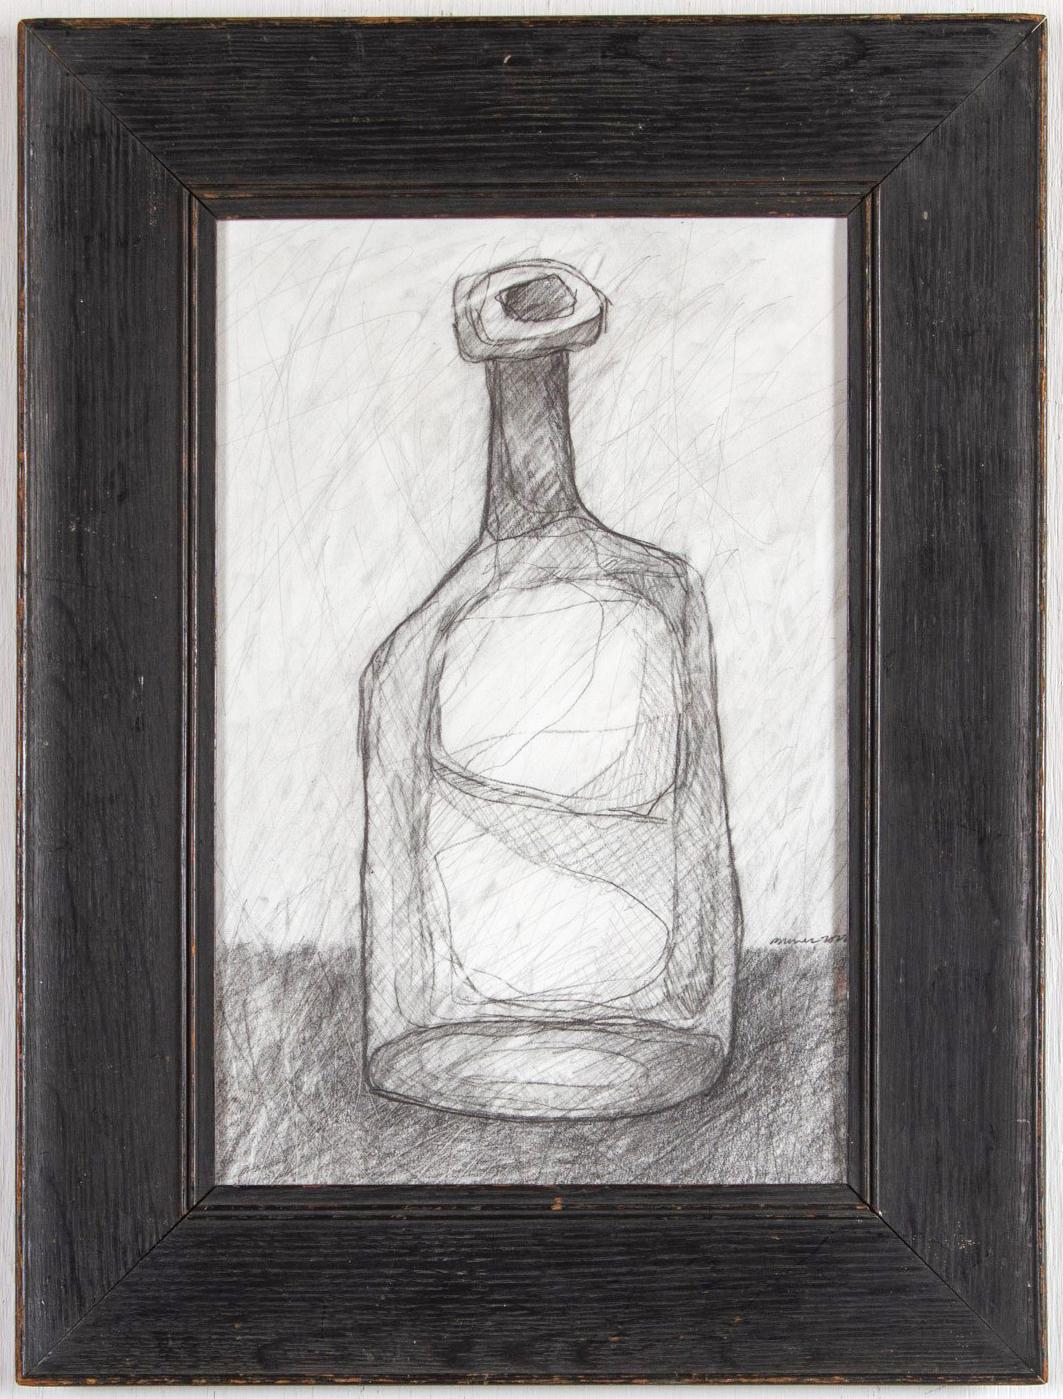 David Dew Bruner Abstract Drawing - Single Bottle II: Abstract Cubist Style Morandi Bottle Still Life Pencil Drawing